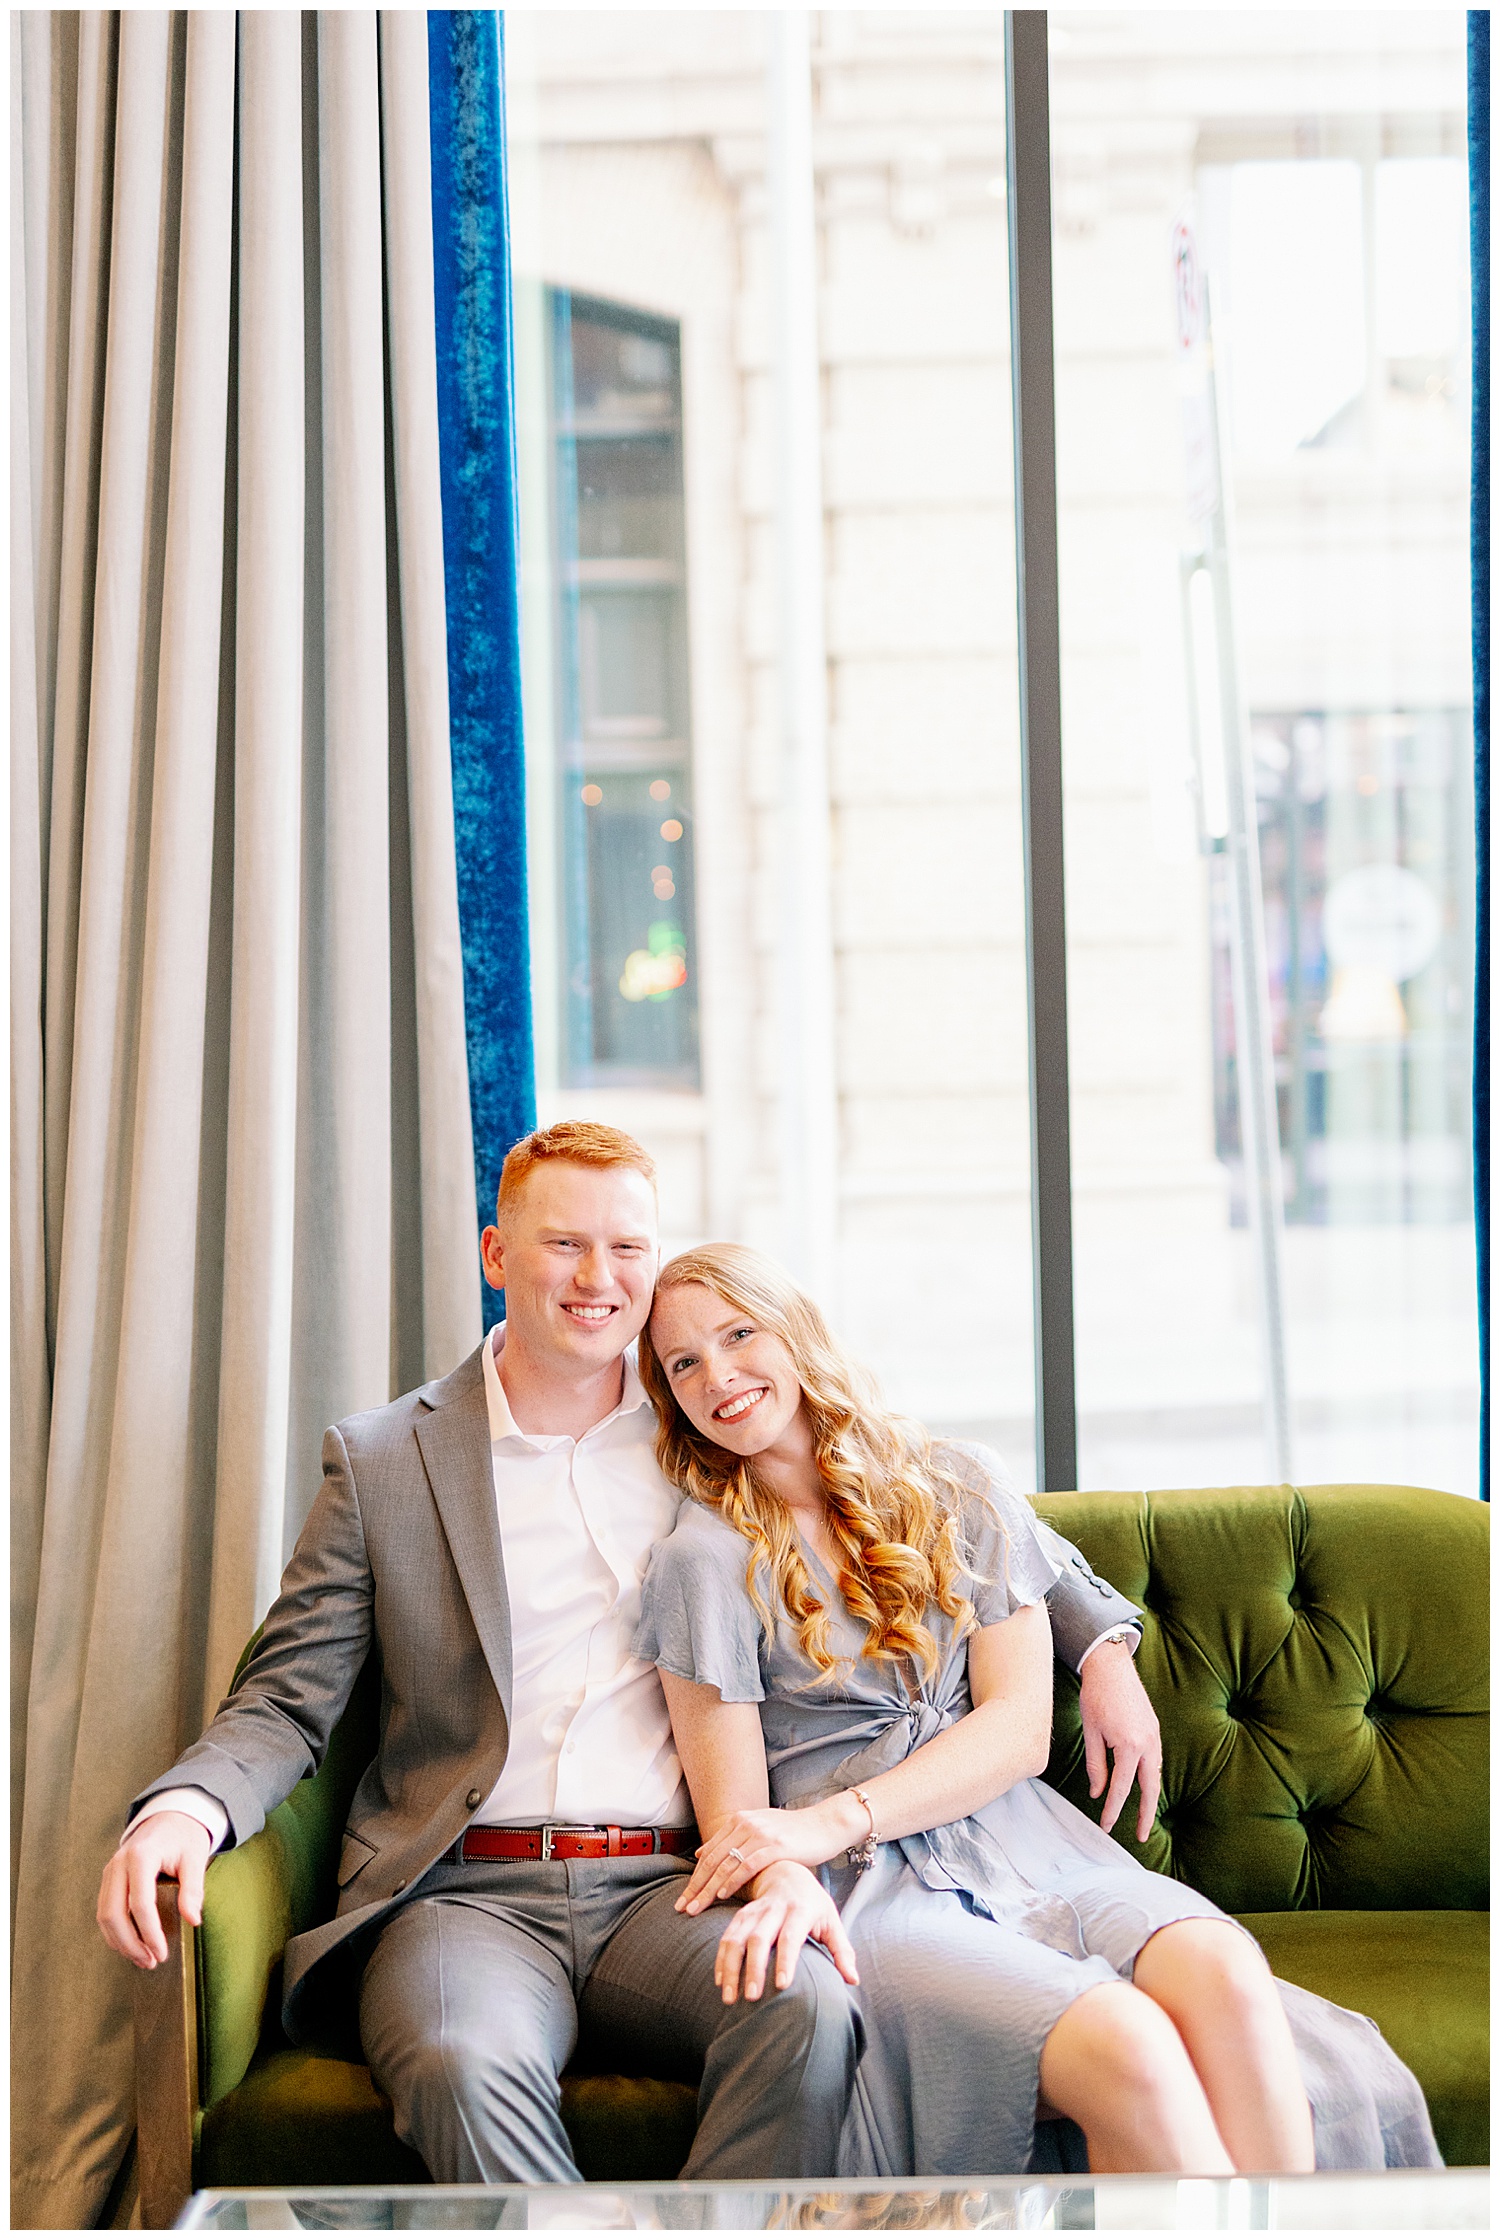 winter engagement session rachel and cameron on the green couch smiling 